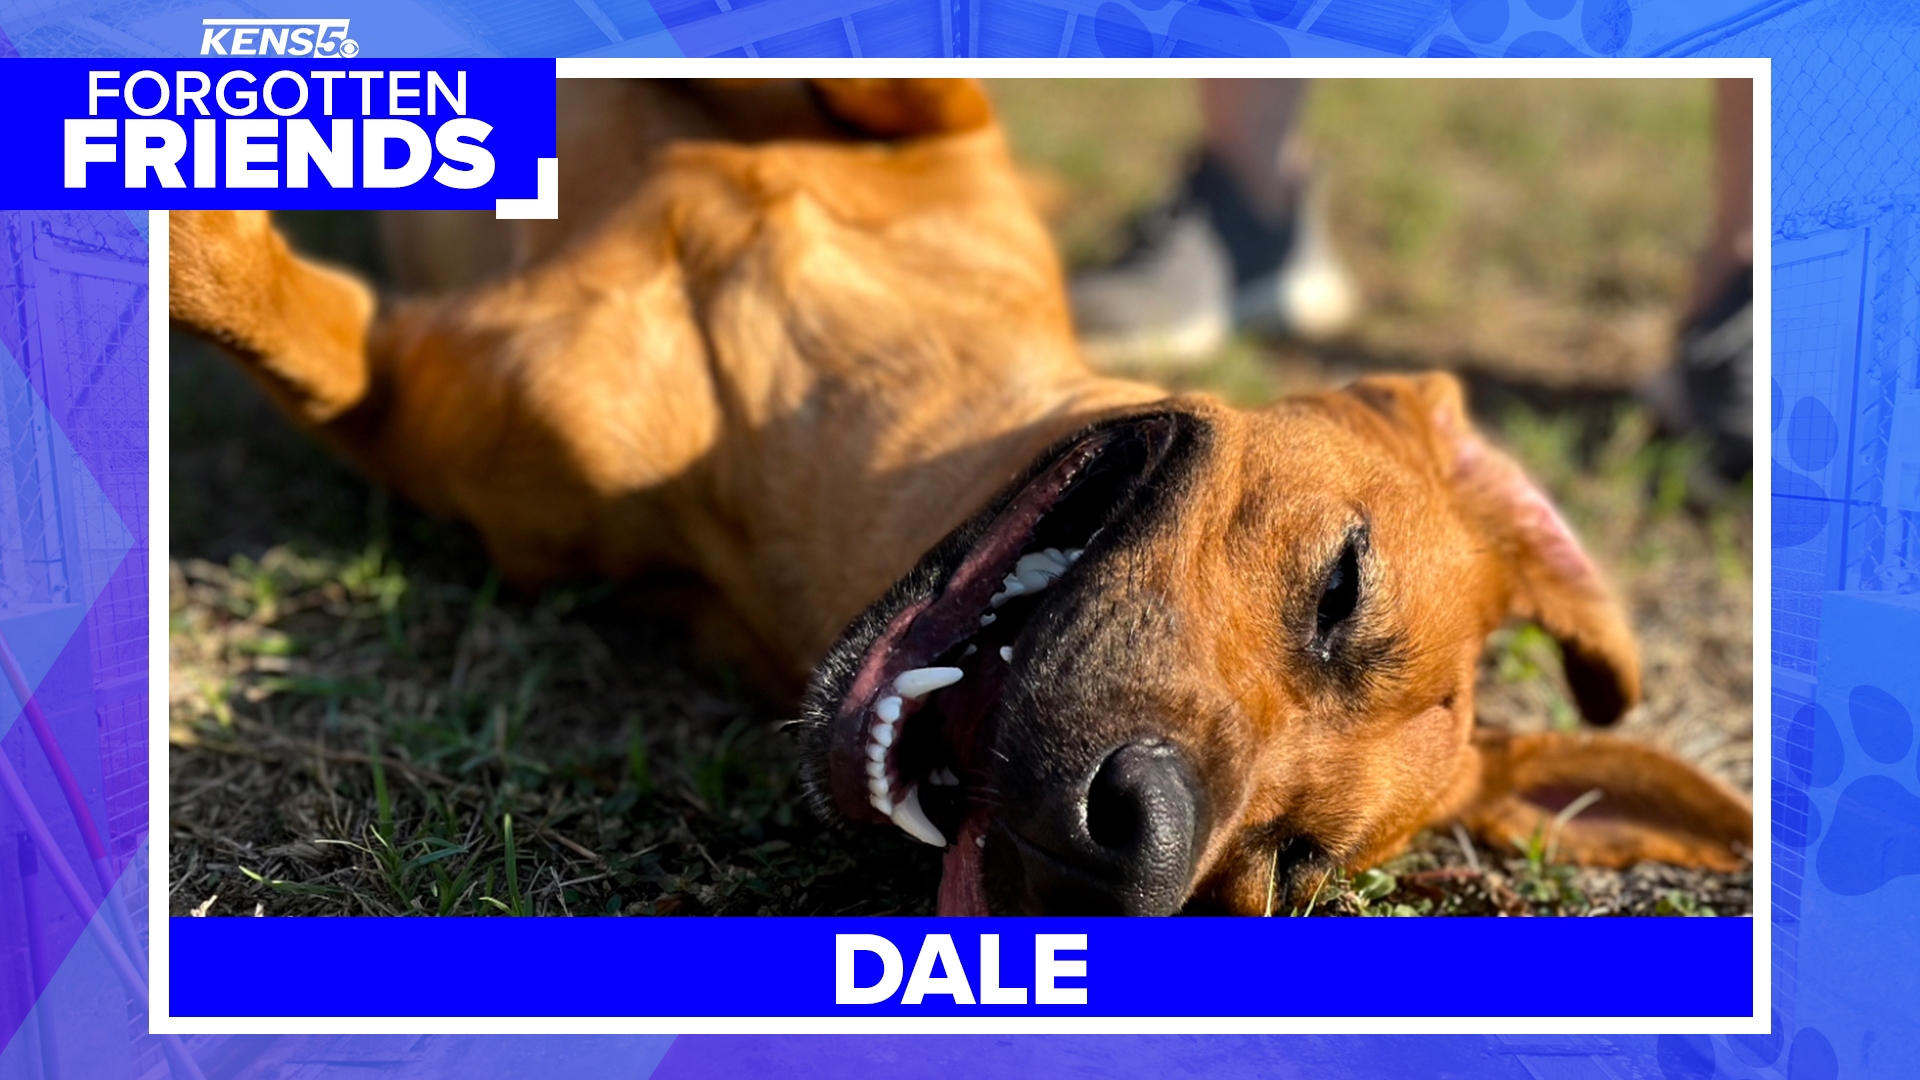 She is a three-year-old Rhodesian Ridgeback and Retriever mix who has been waiting two years for her very own home with humans to love.